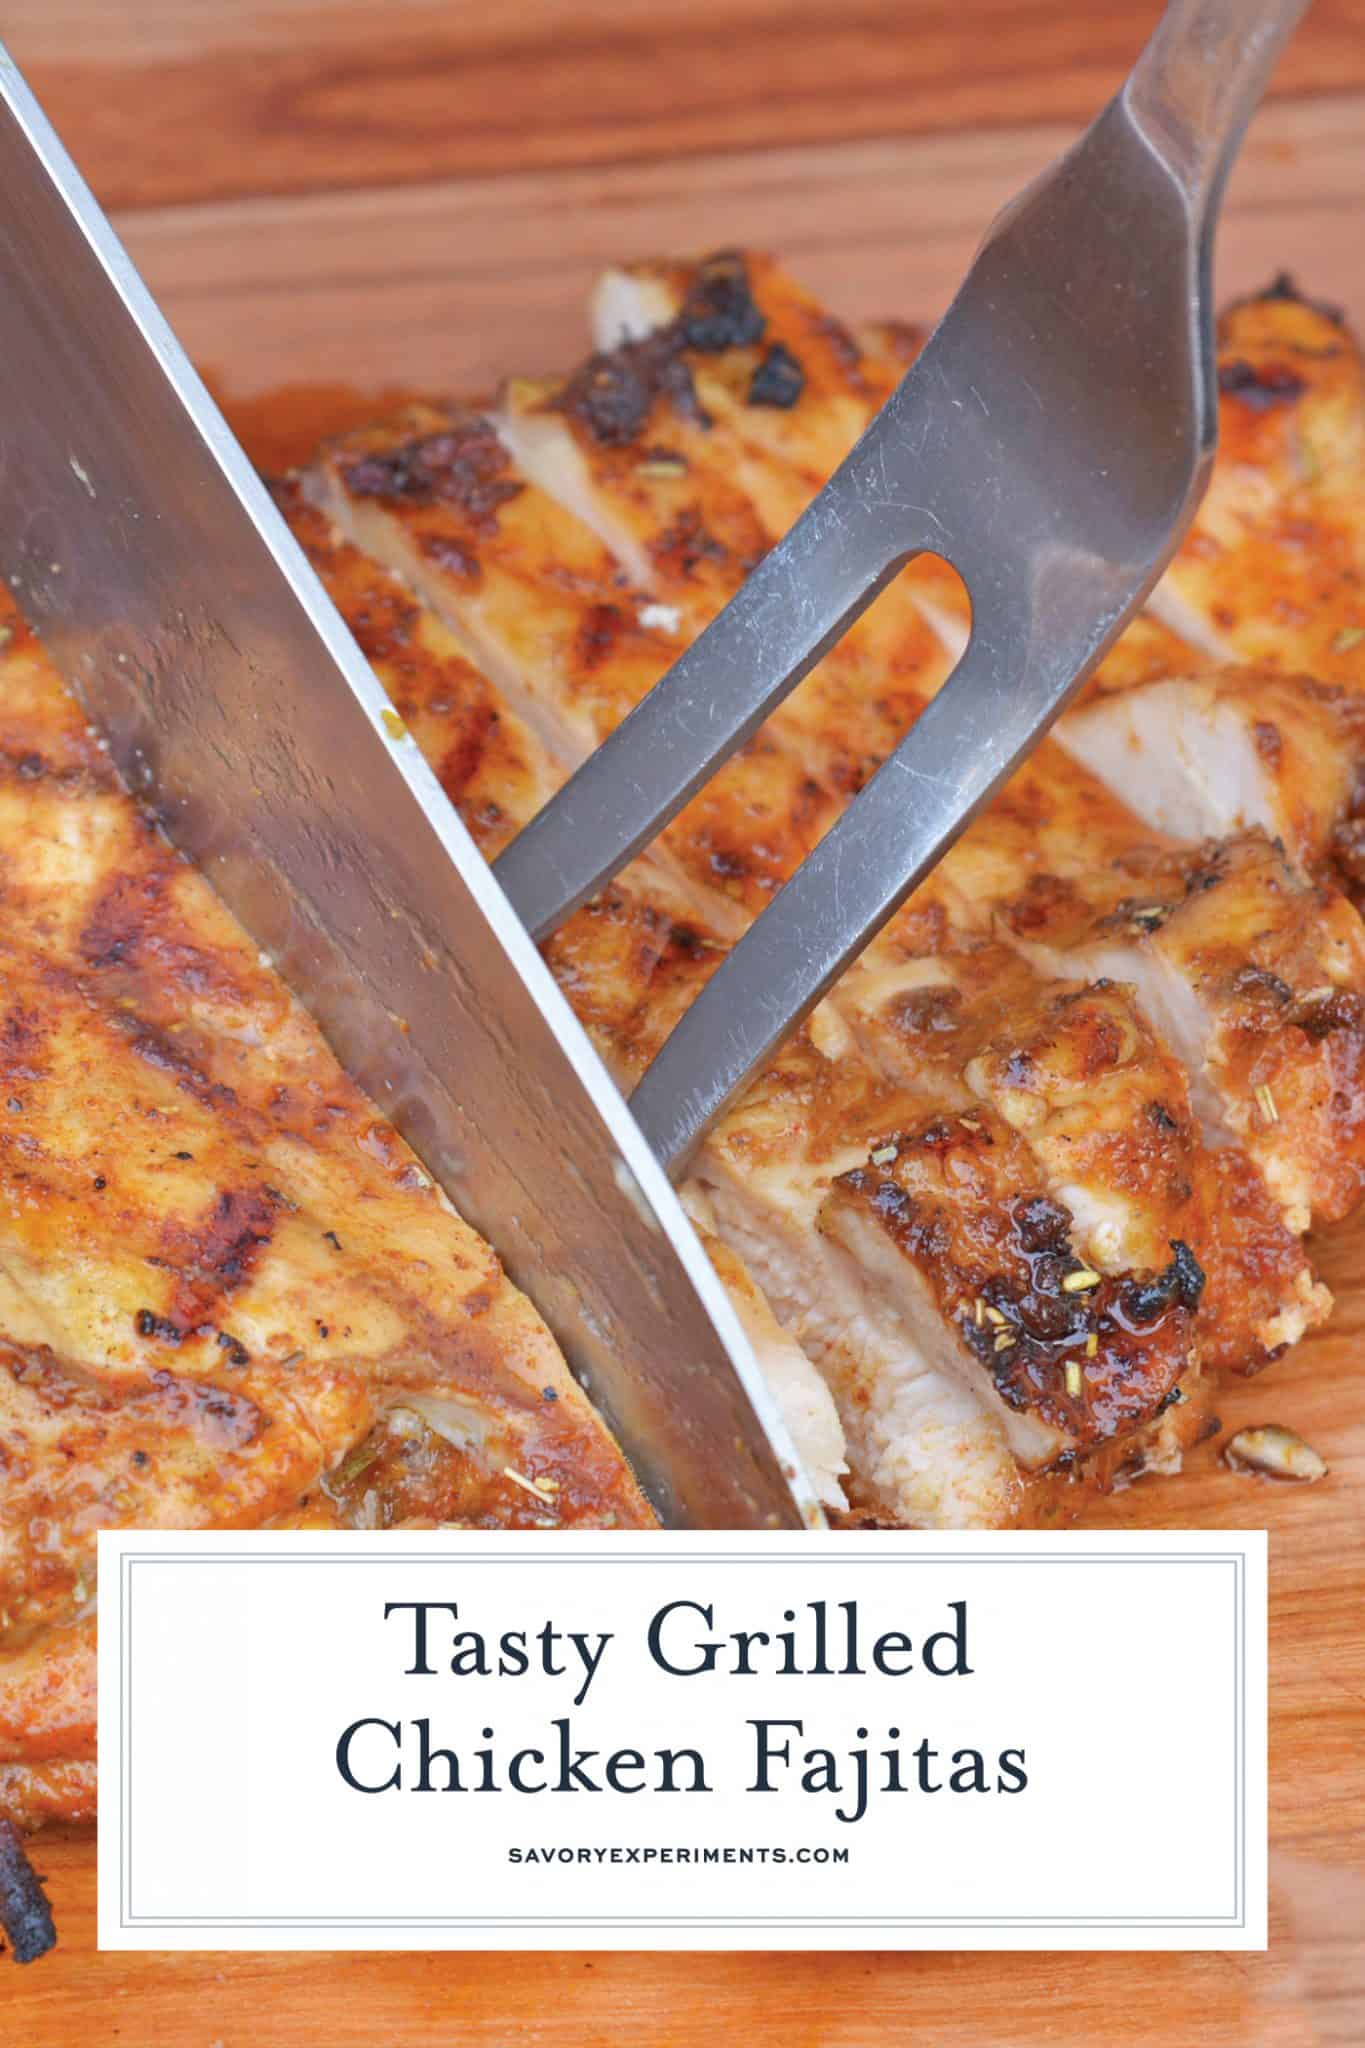 My Grilled Chicken Fajitas are a simple and healthy meal that you can have ready in under 30 minutes and make for the perfect weeknight meal.  #grilledchickenfajitas #fajitas #grilledchicken www.savoryexperiments.com